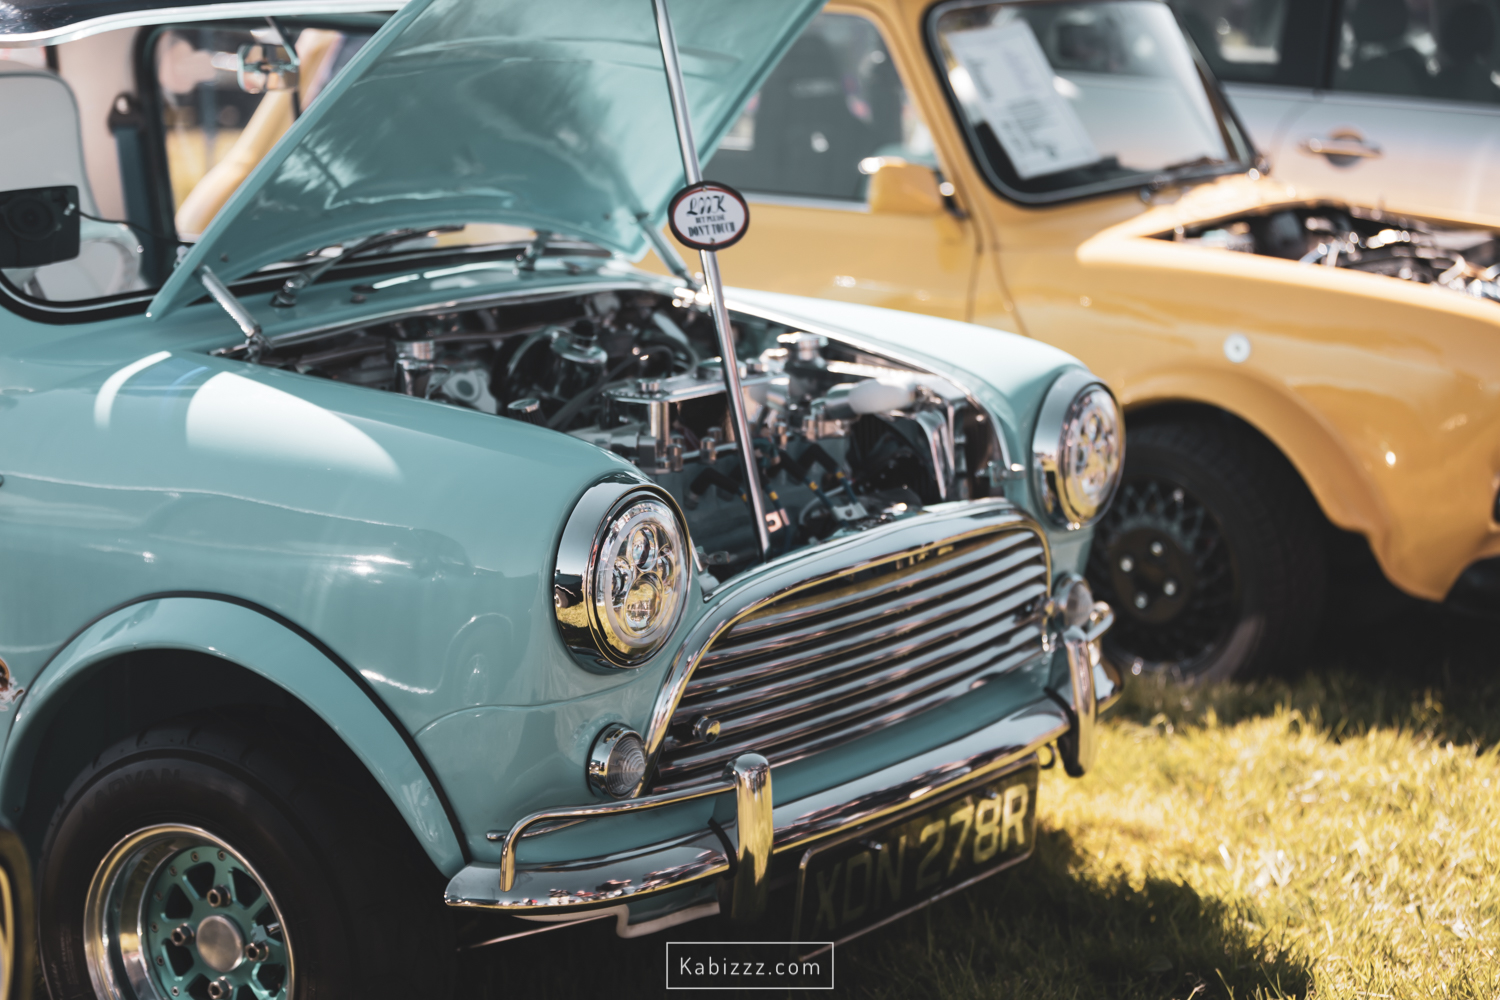 Kabizzz_Photography_Stirling_District_Classic _cars-29.jpg